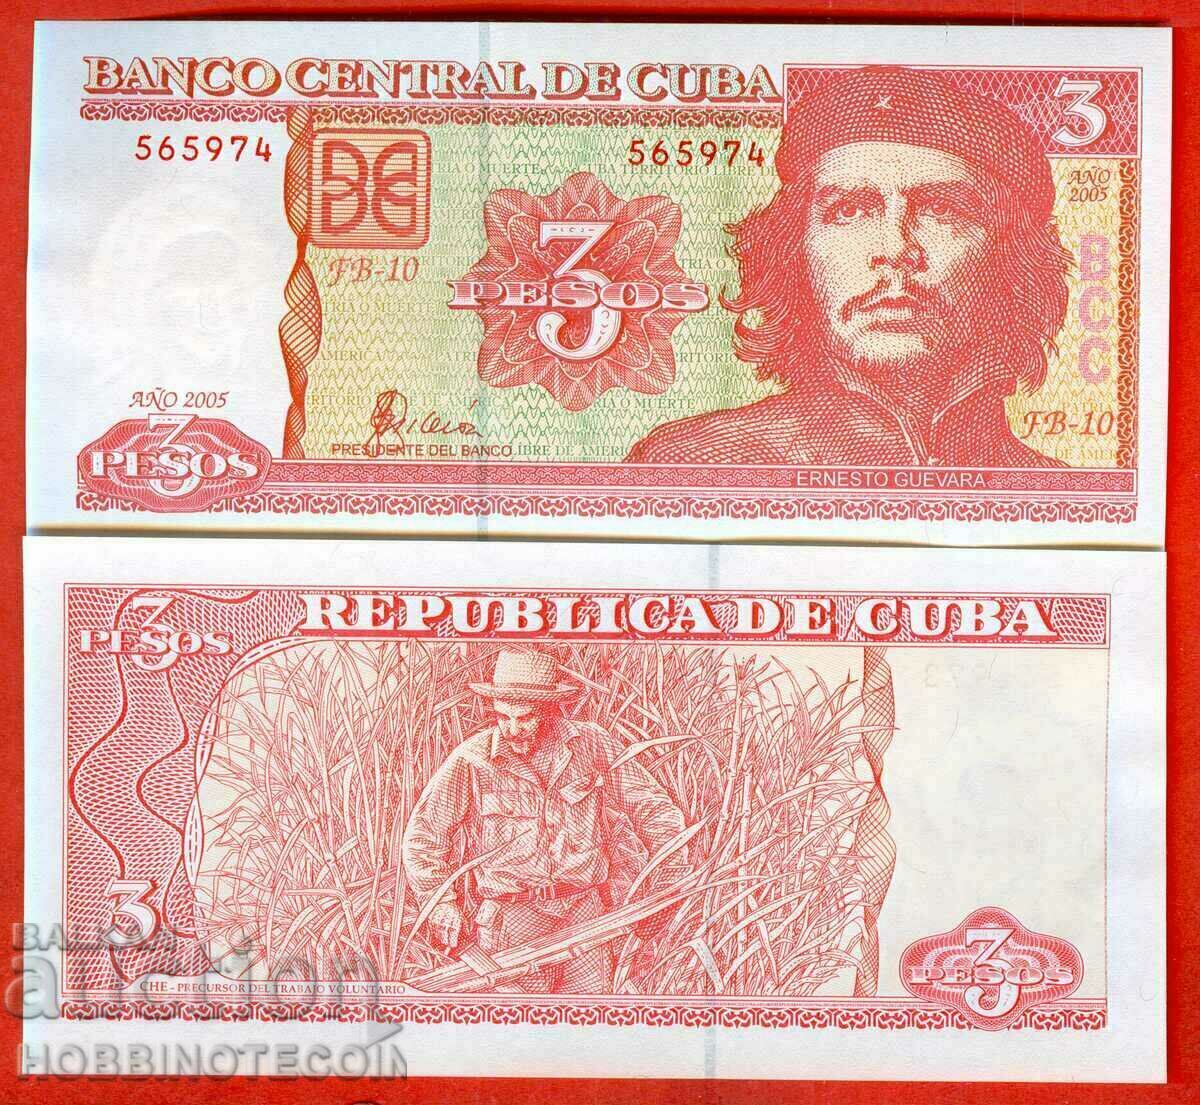 CUBA CUBA COINS 3 Peso issue issue 2005 NEW UNC